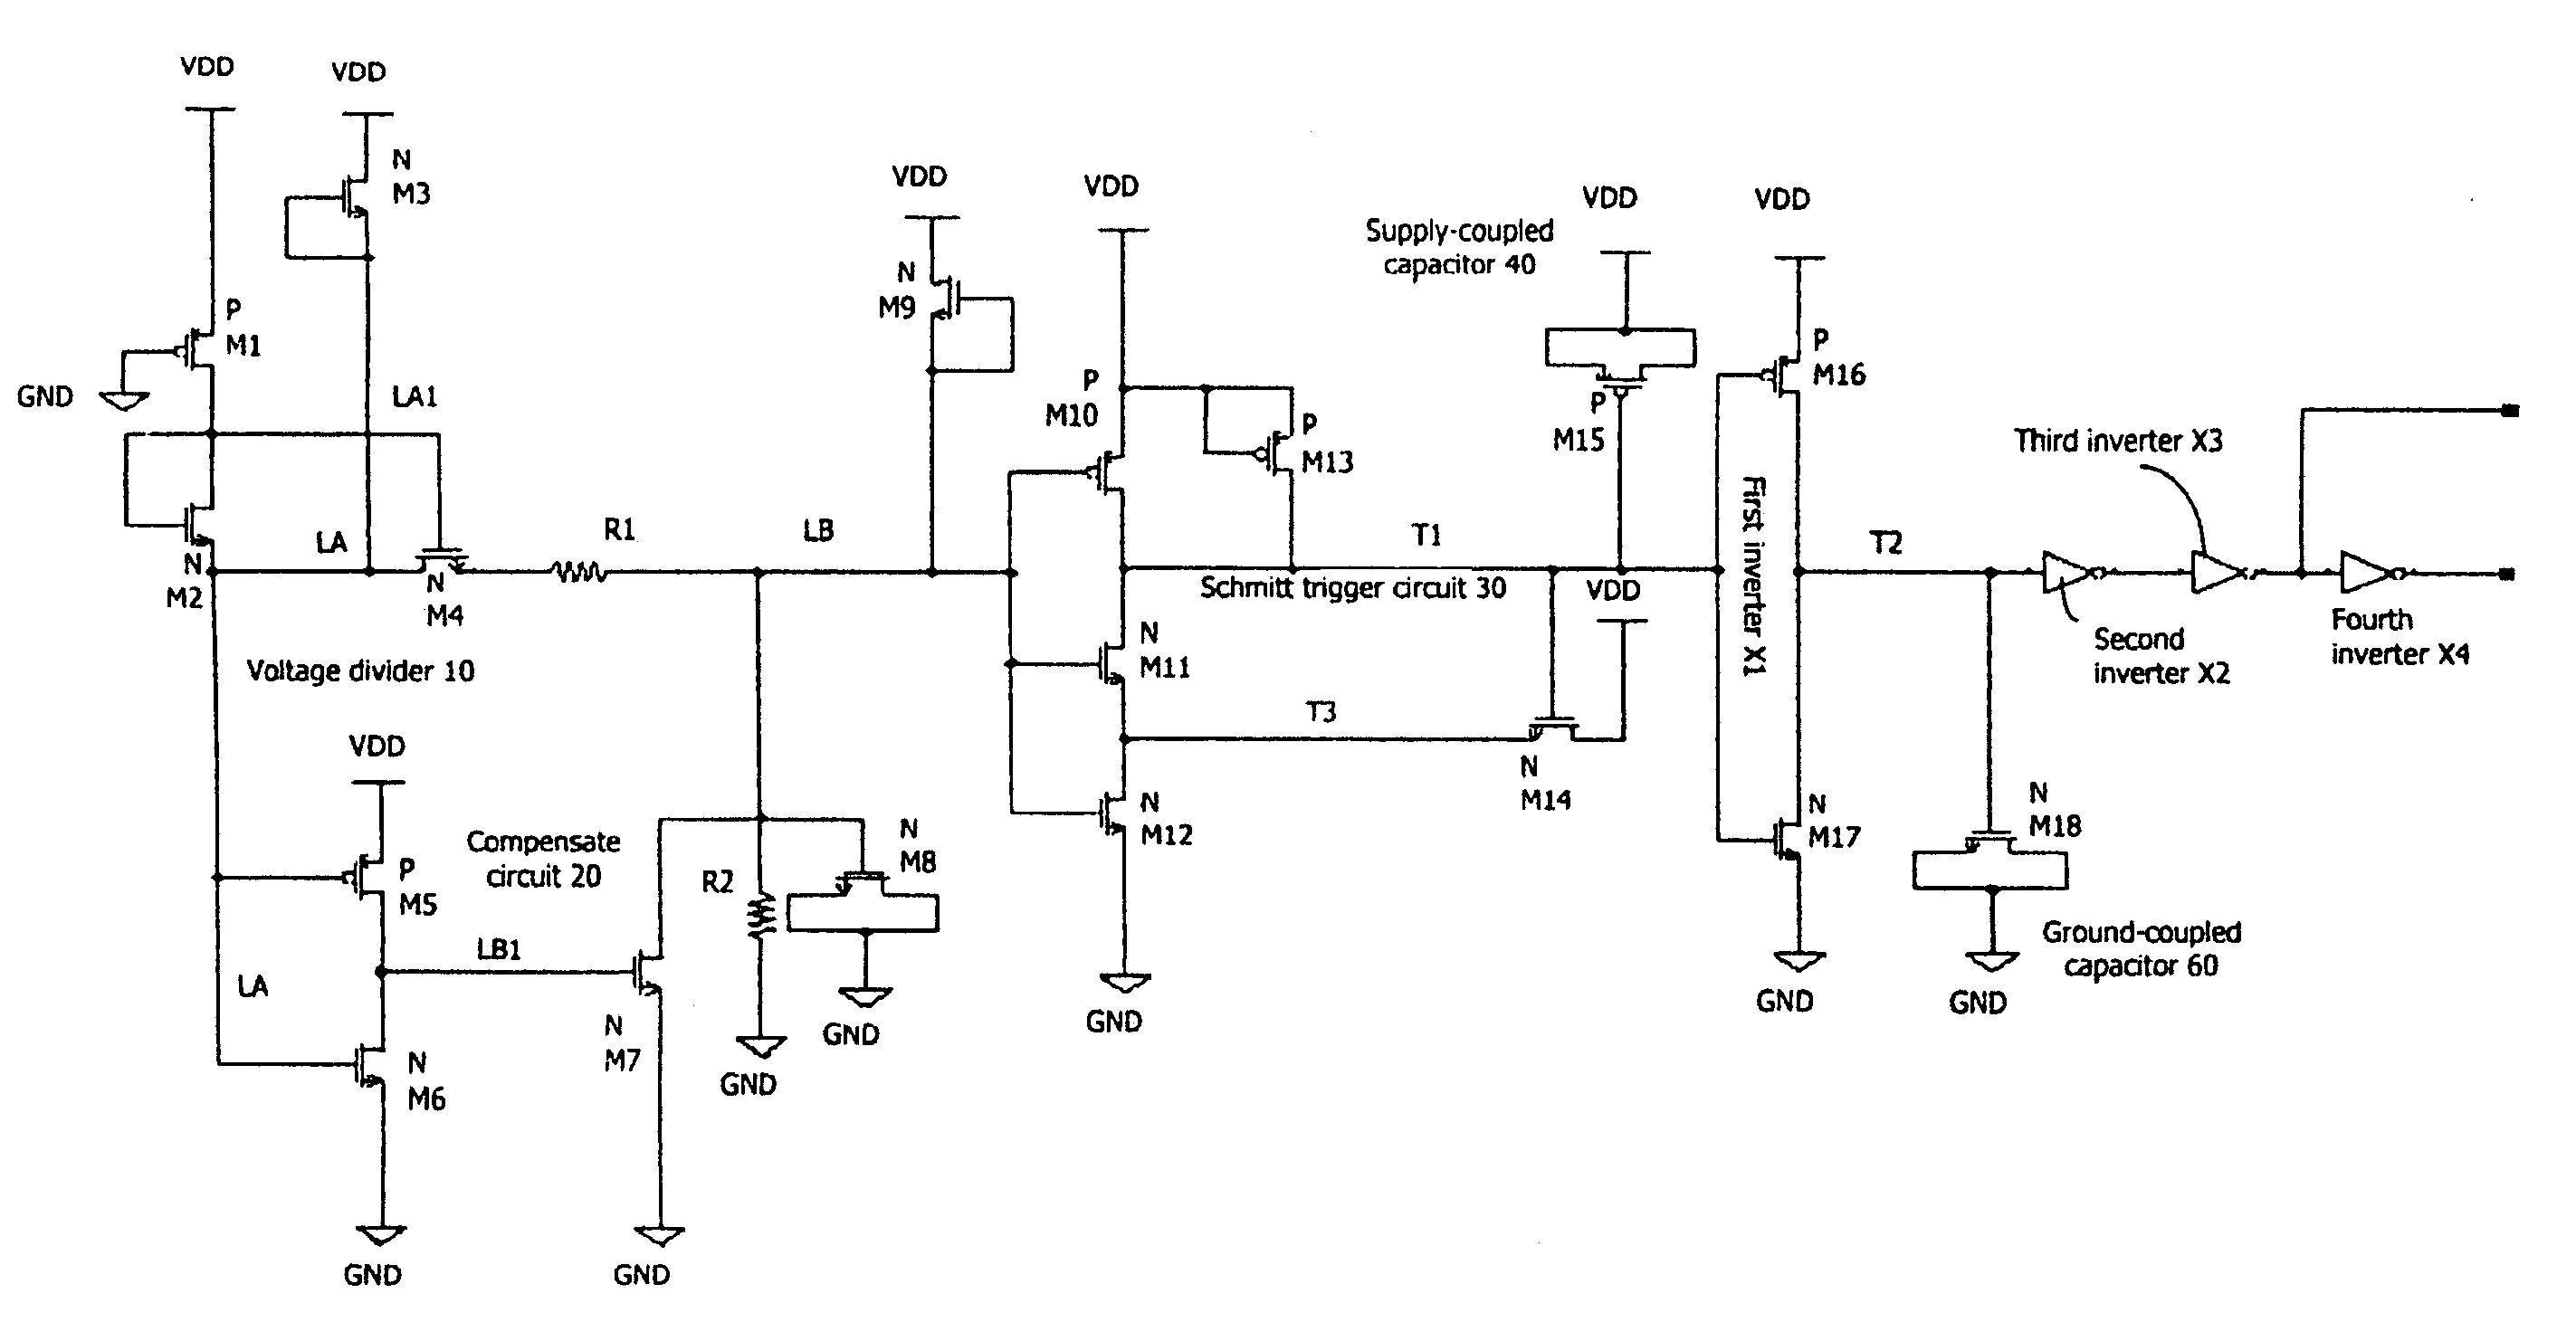 Power-on reset circuit with supply voltage and temperature immunity, ultra-low DC leakage current, and fast power crash reaction